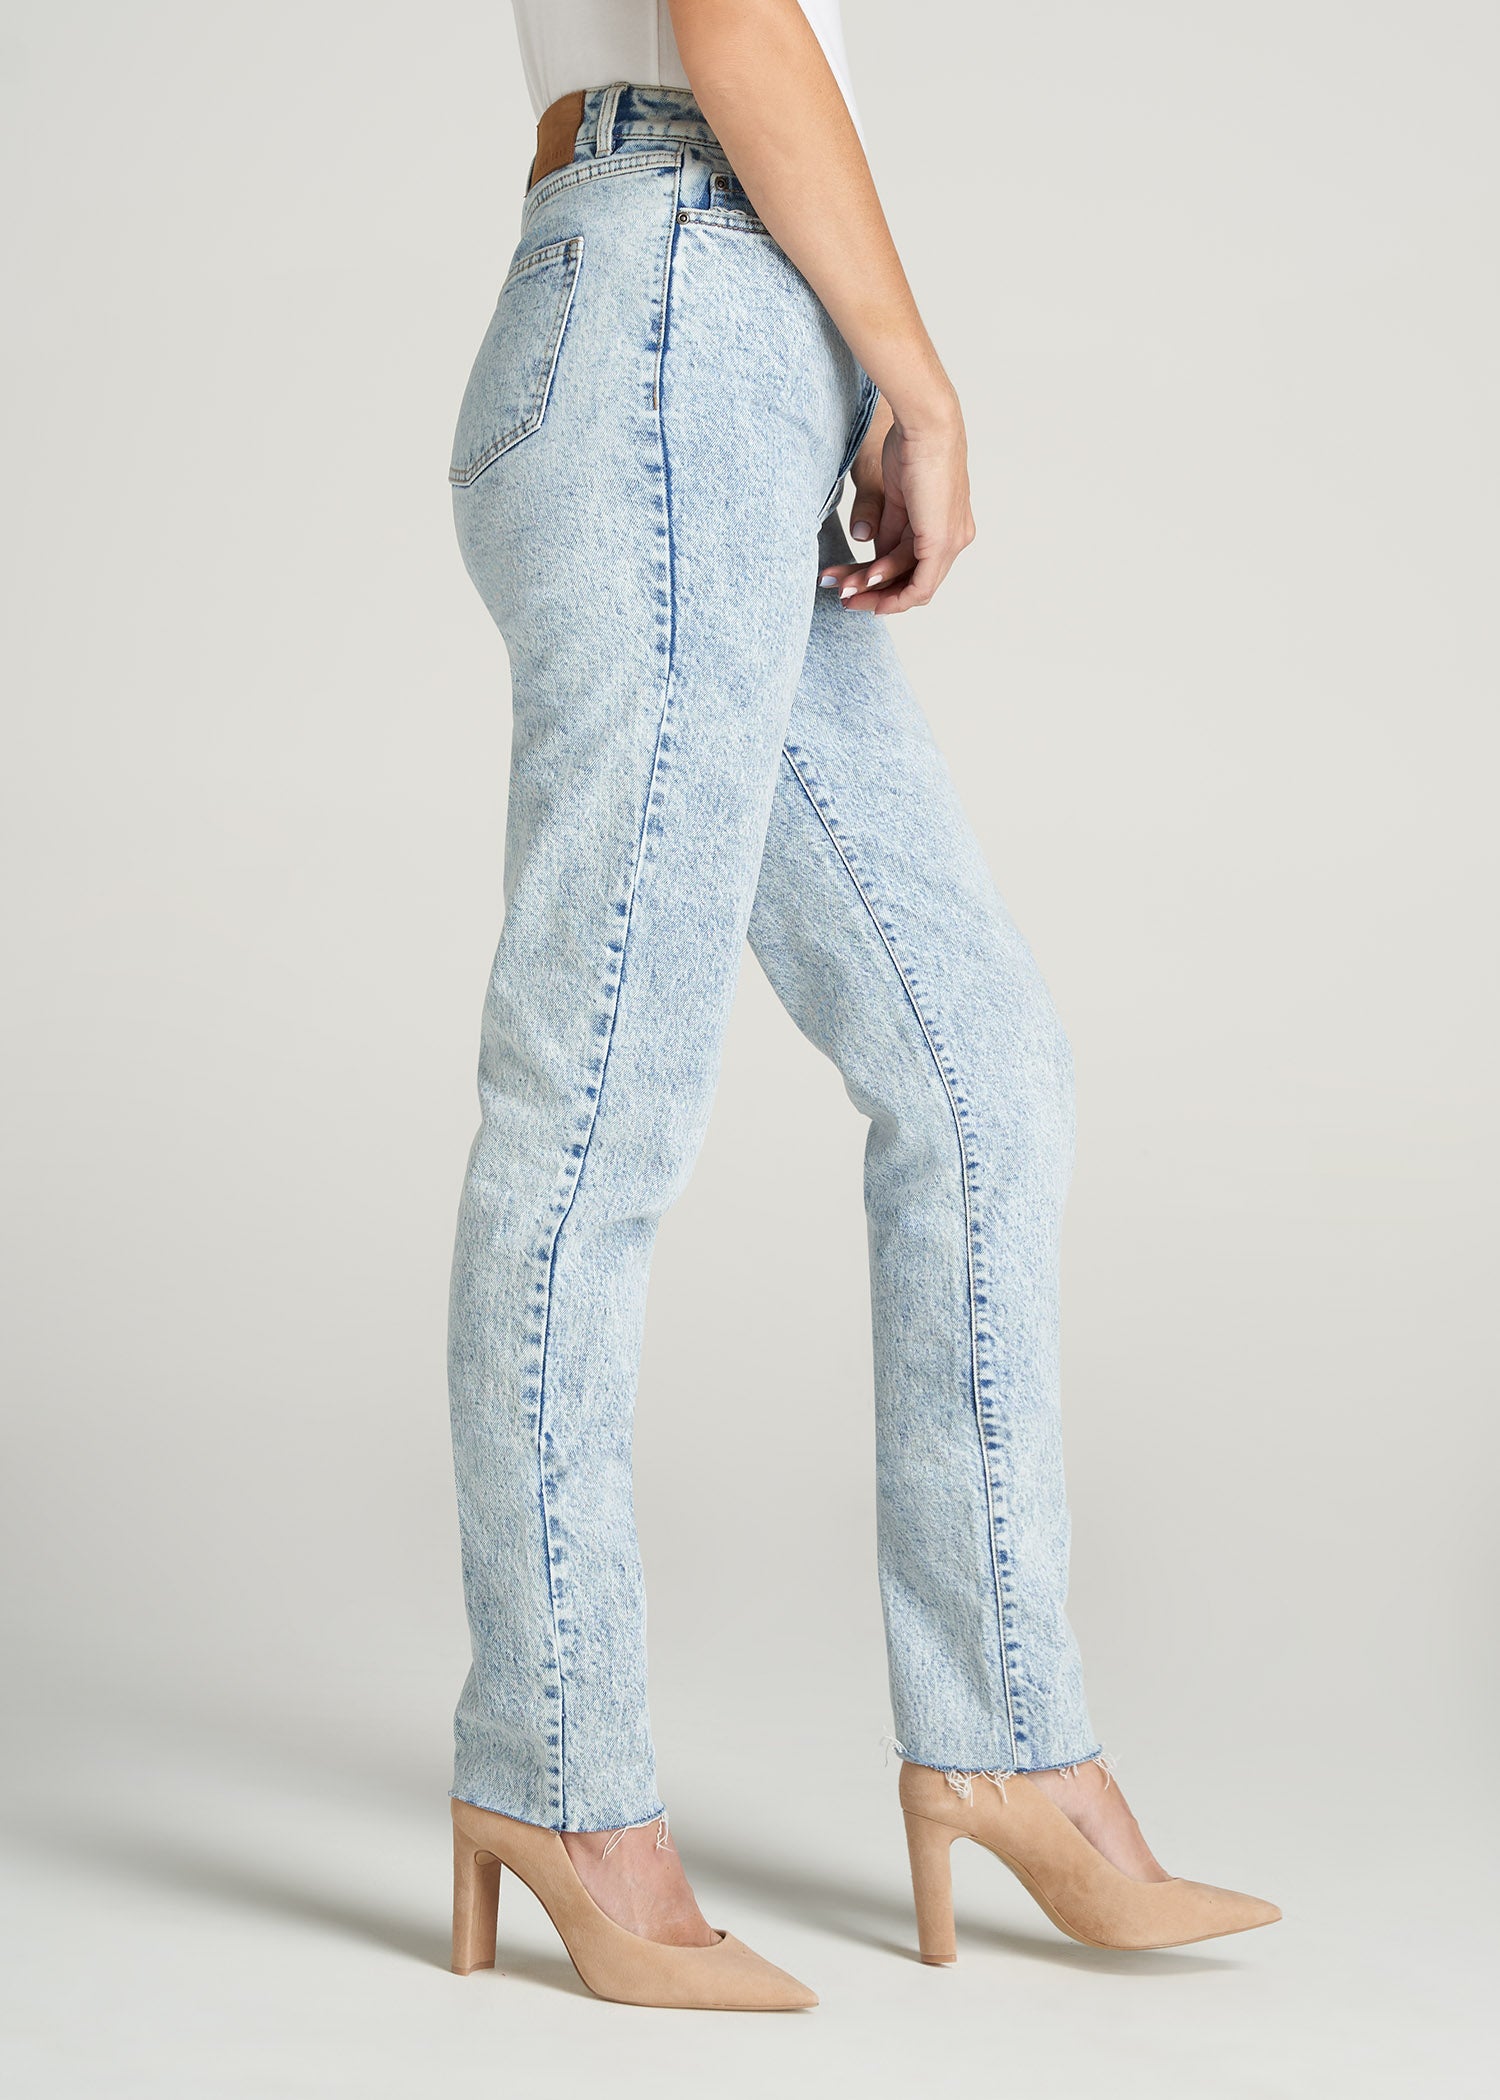 Stone Washed Jeans for Tall Women Lola Stretch – American Tall